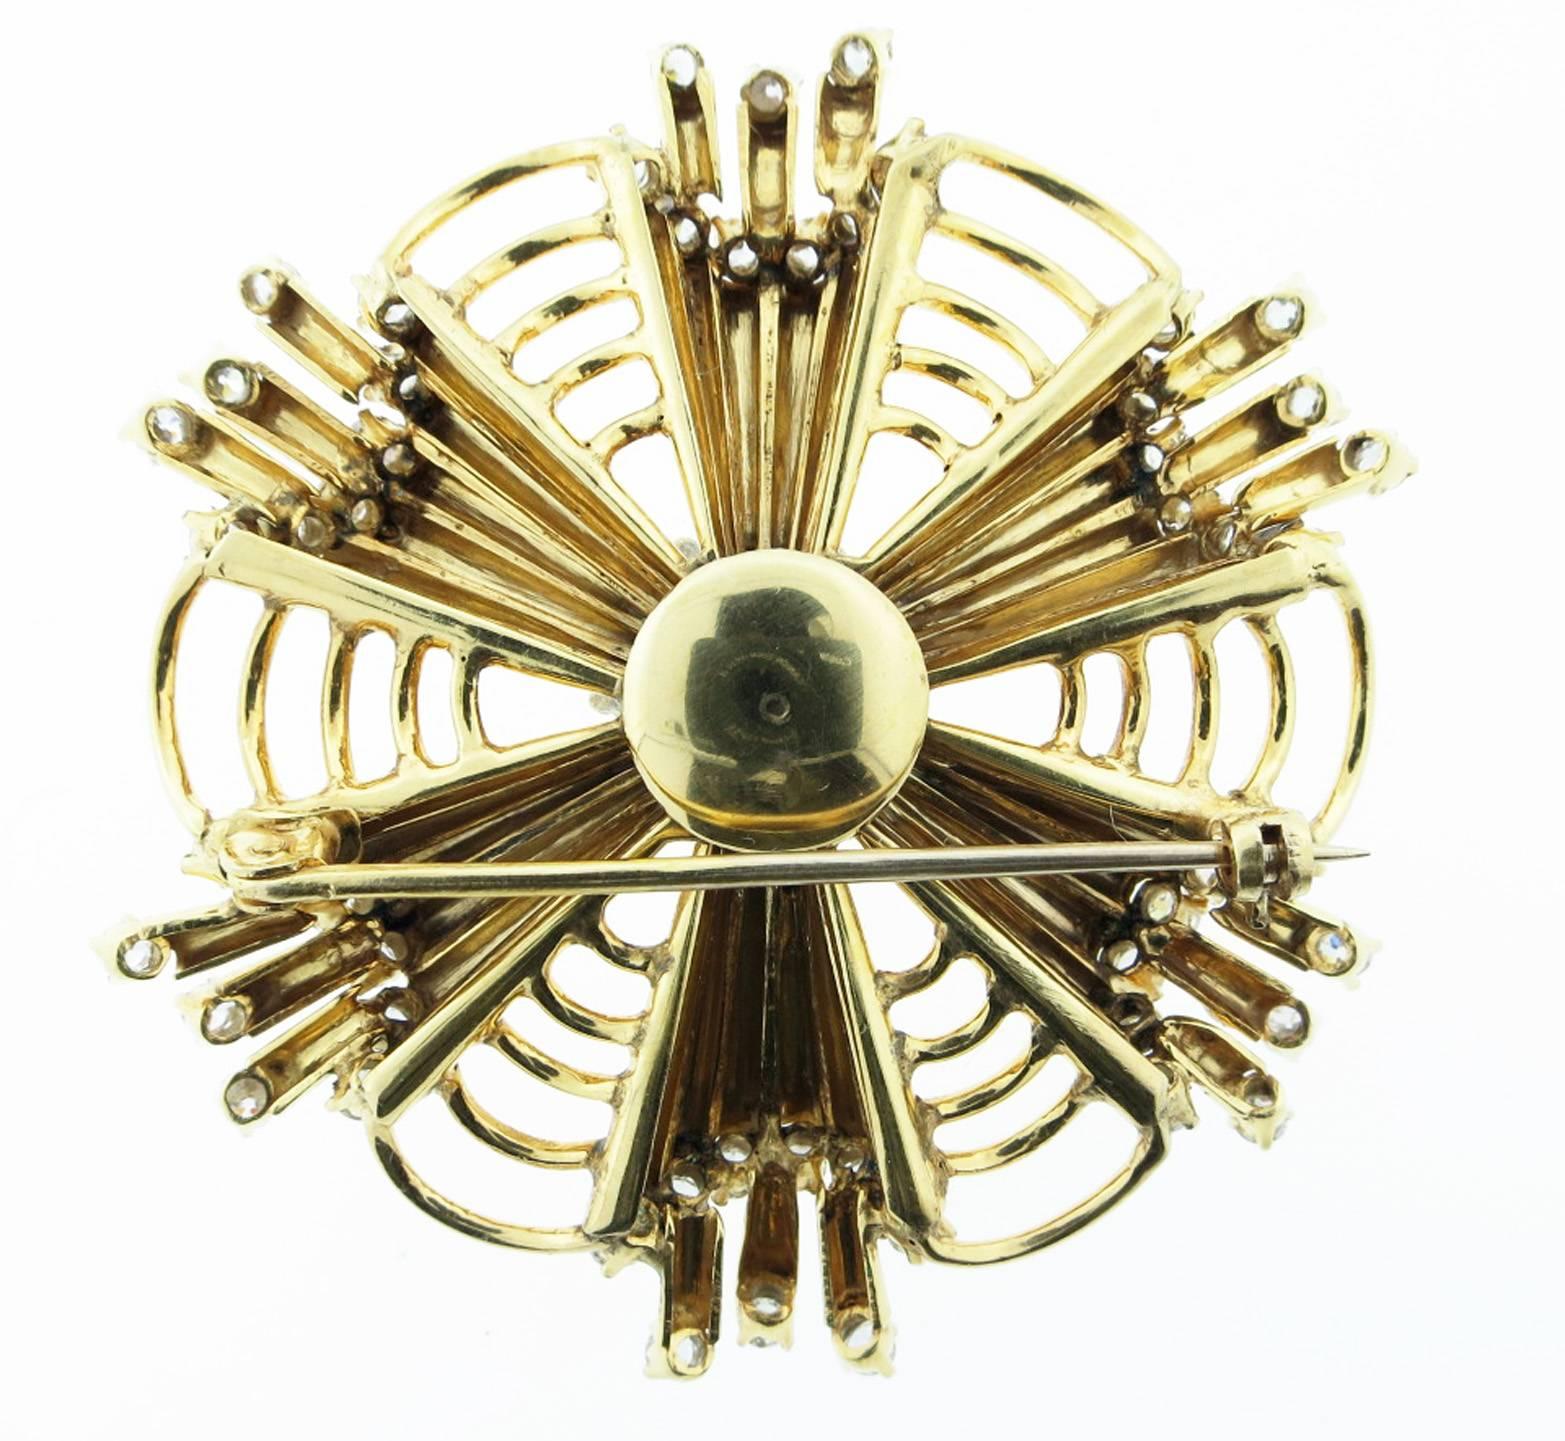 14kt. yellow gold retro brooch in a fluted web design set with 60 round European cut diamonds totaling approx .75cts. The brooch measures 2 1/2 inches and weighs 26.4 gr. Cosmic ... Circa 1945.